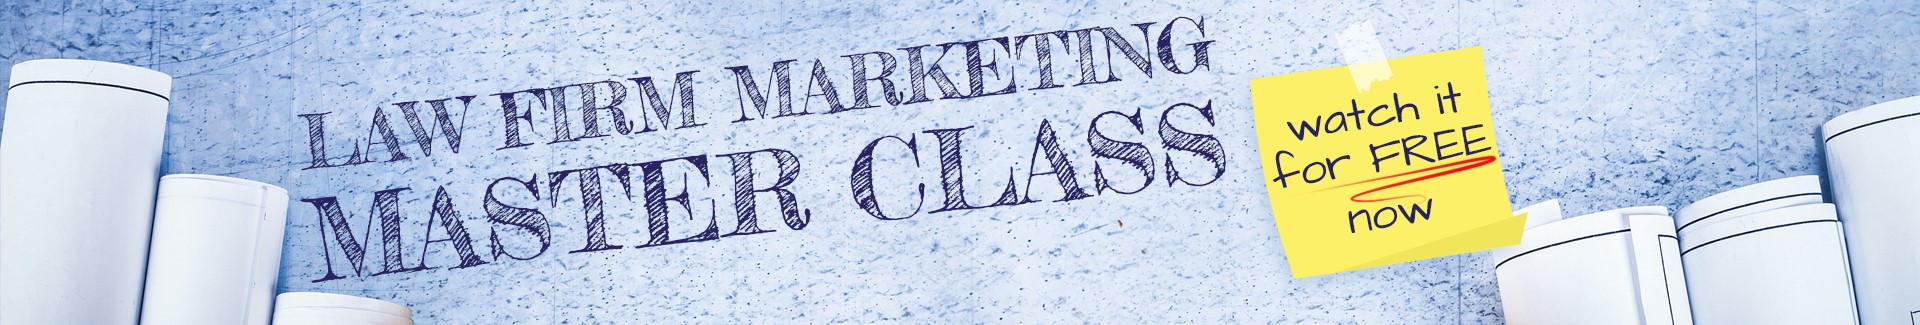 law firm marketing master class: the marketing blueprint workbook and video